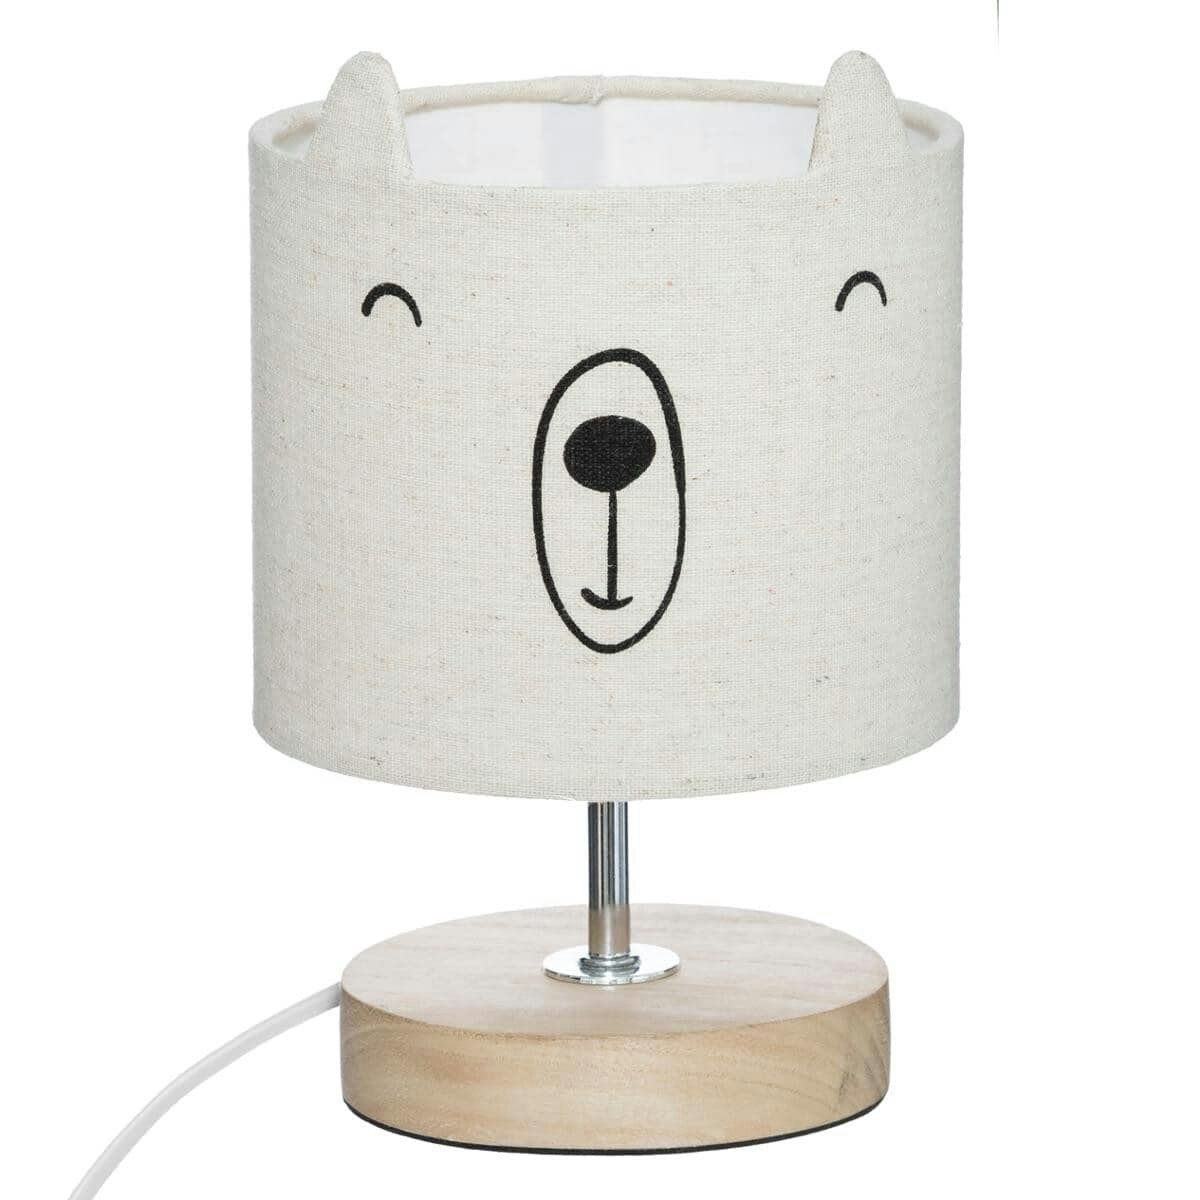 Table lamp for the children's room, teddy 